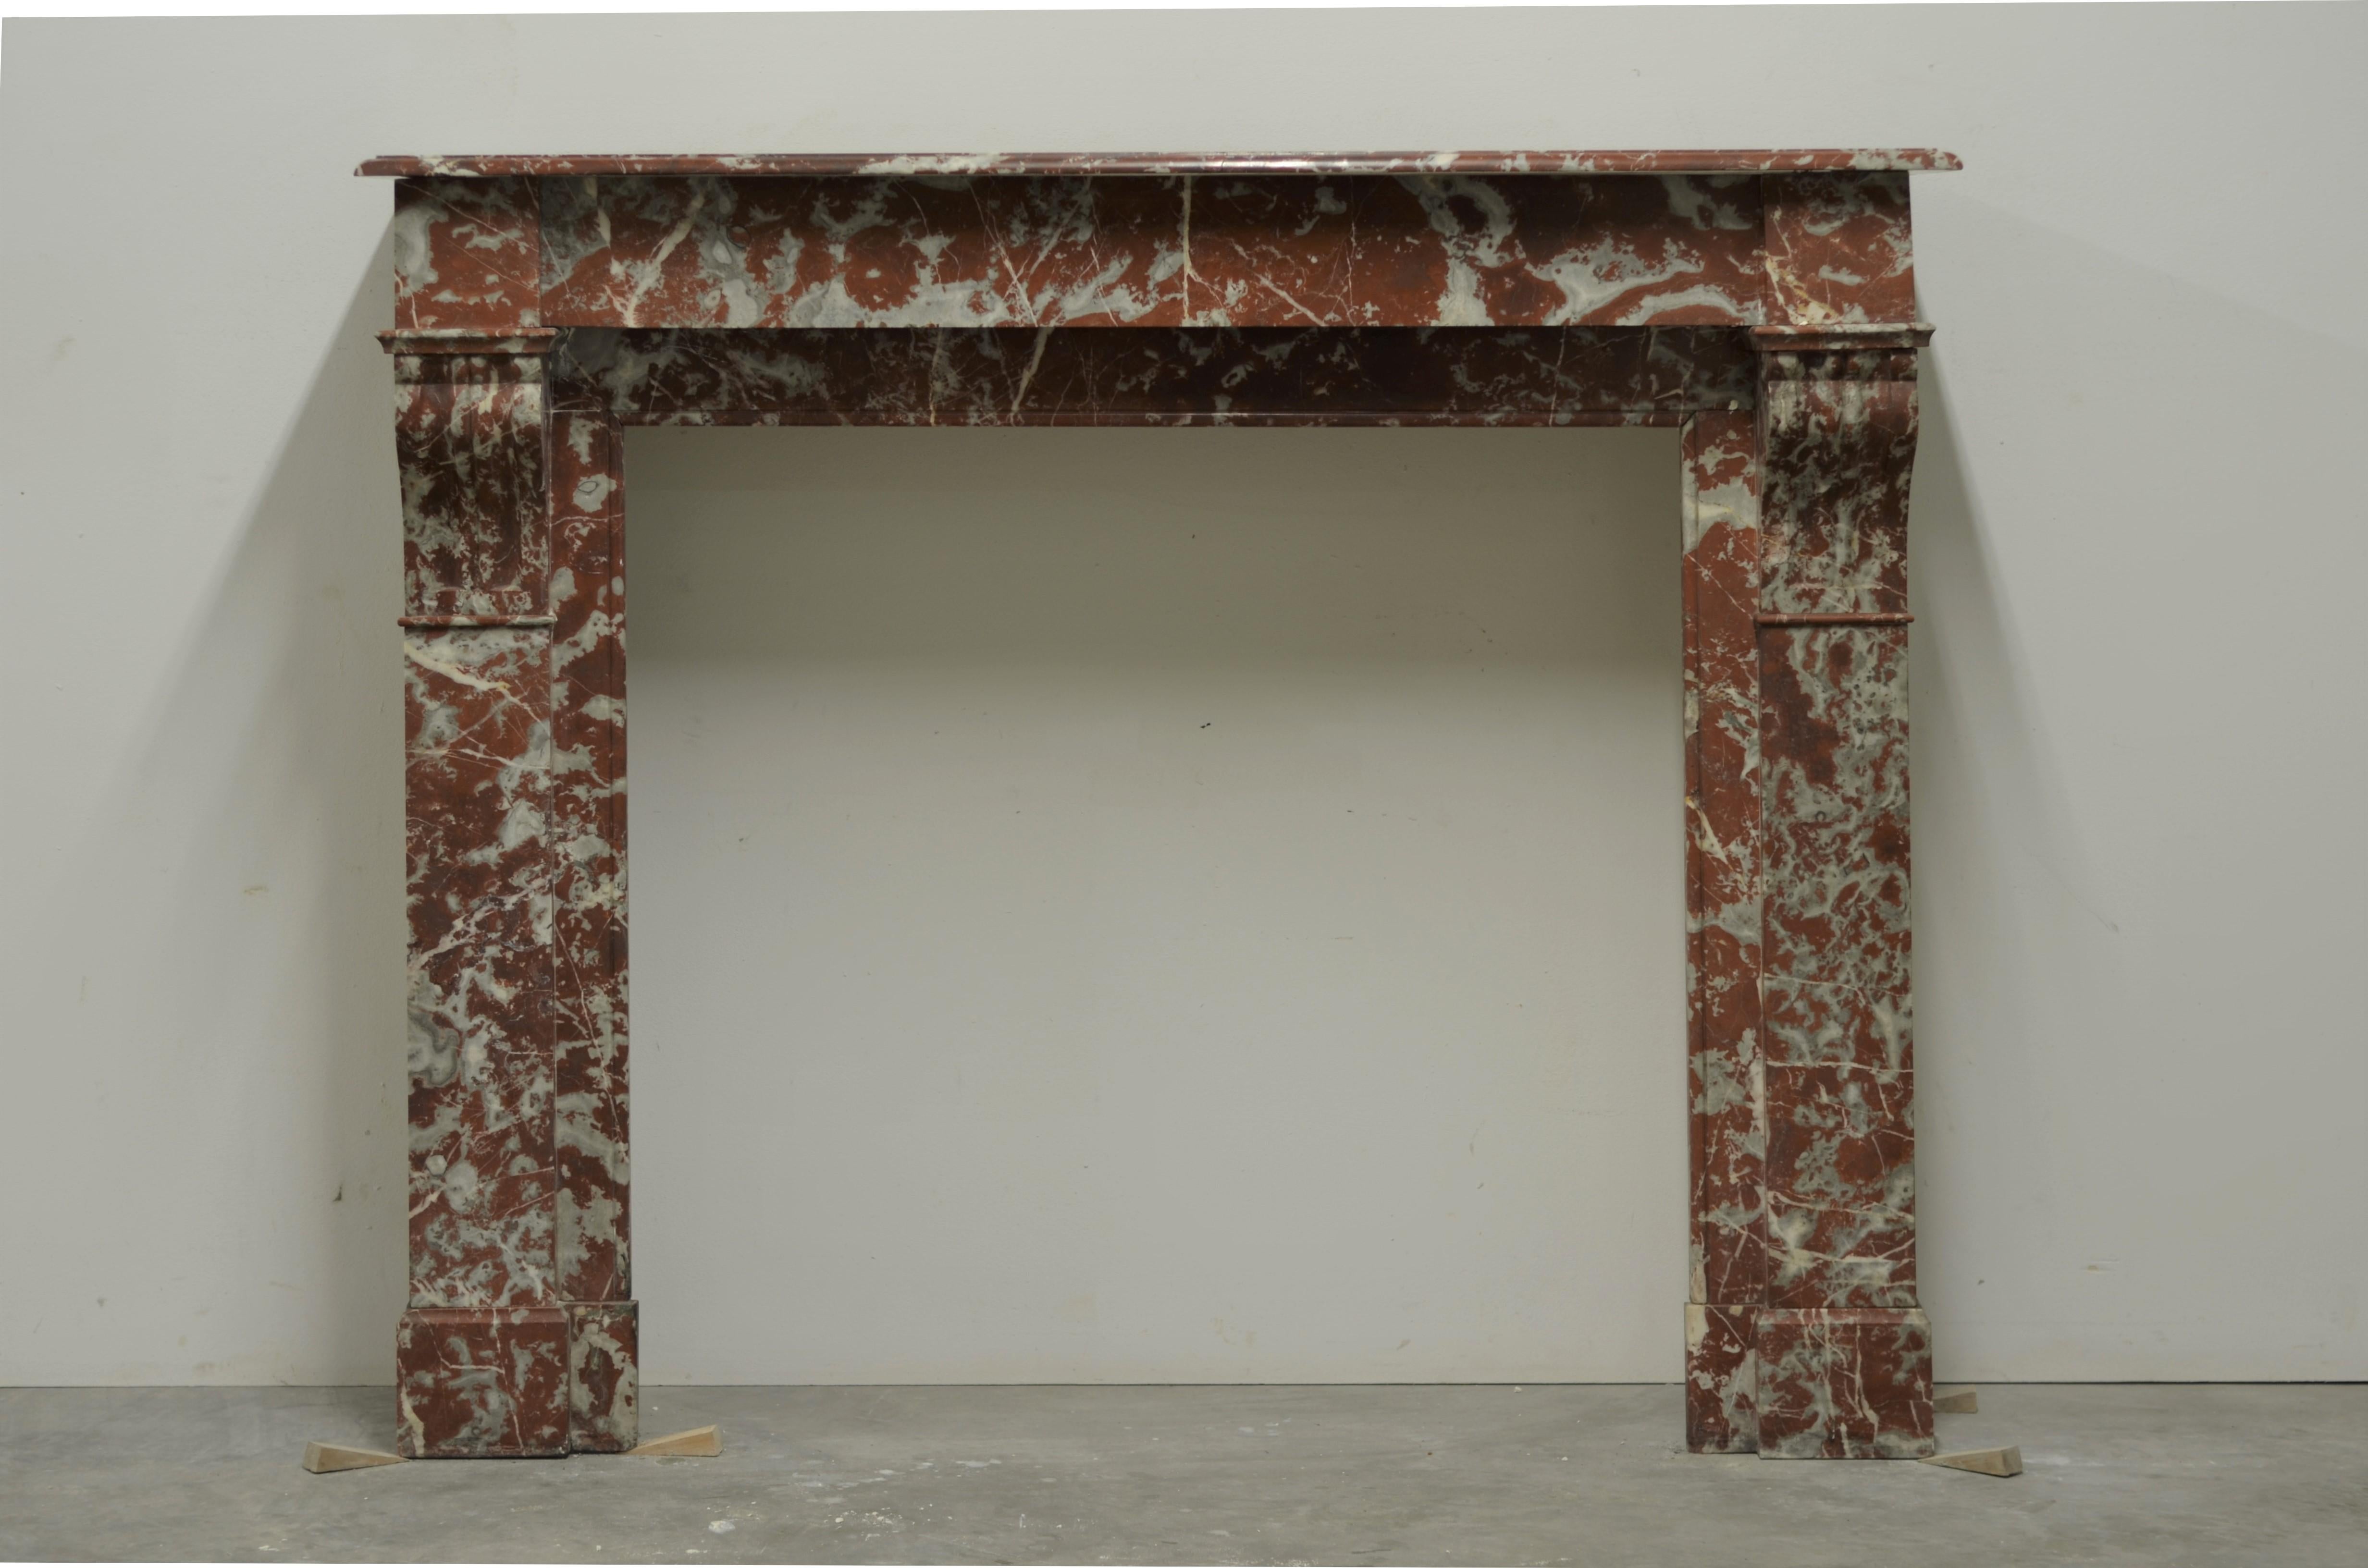 Lovely decorative Parisian fireplace mantel with nicely carved corbels.
Executed in Belgian red marble this mantel was installed in a nice sized Parisian bedroom.

Original condition, ready to be shipped an installed.